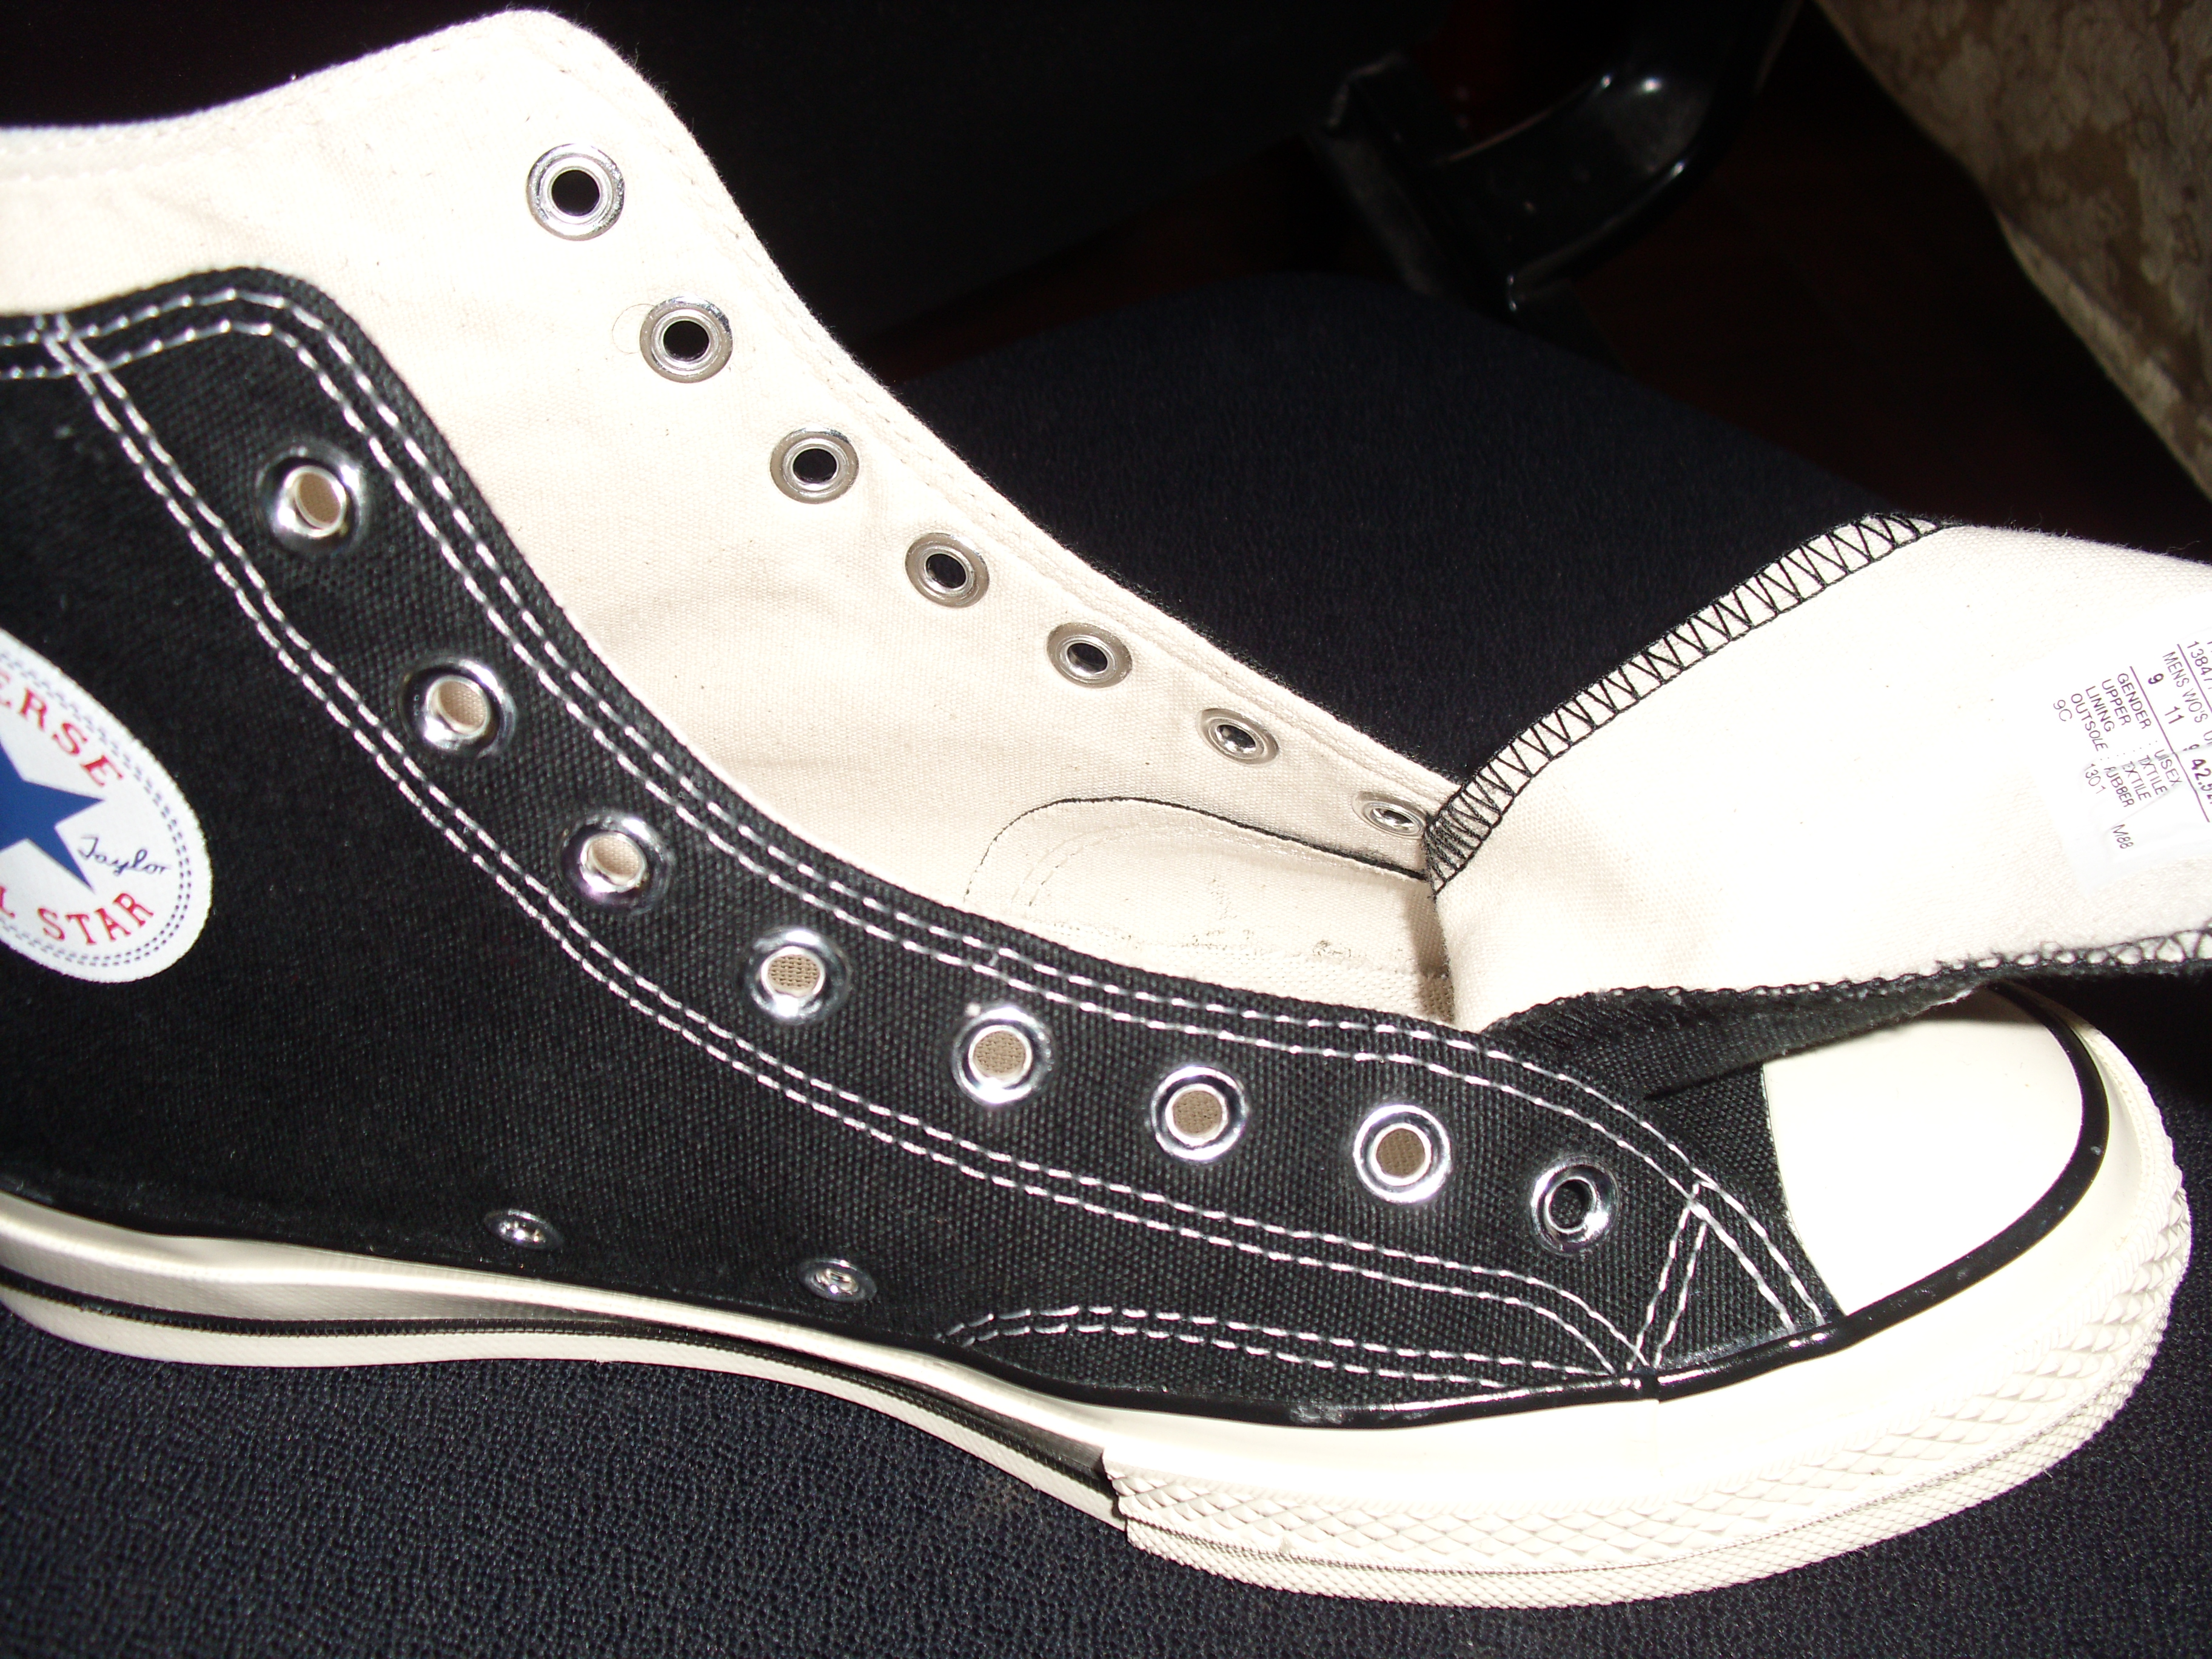 Buy - converse with heels inside - OFF 